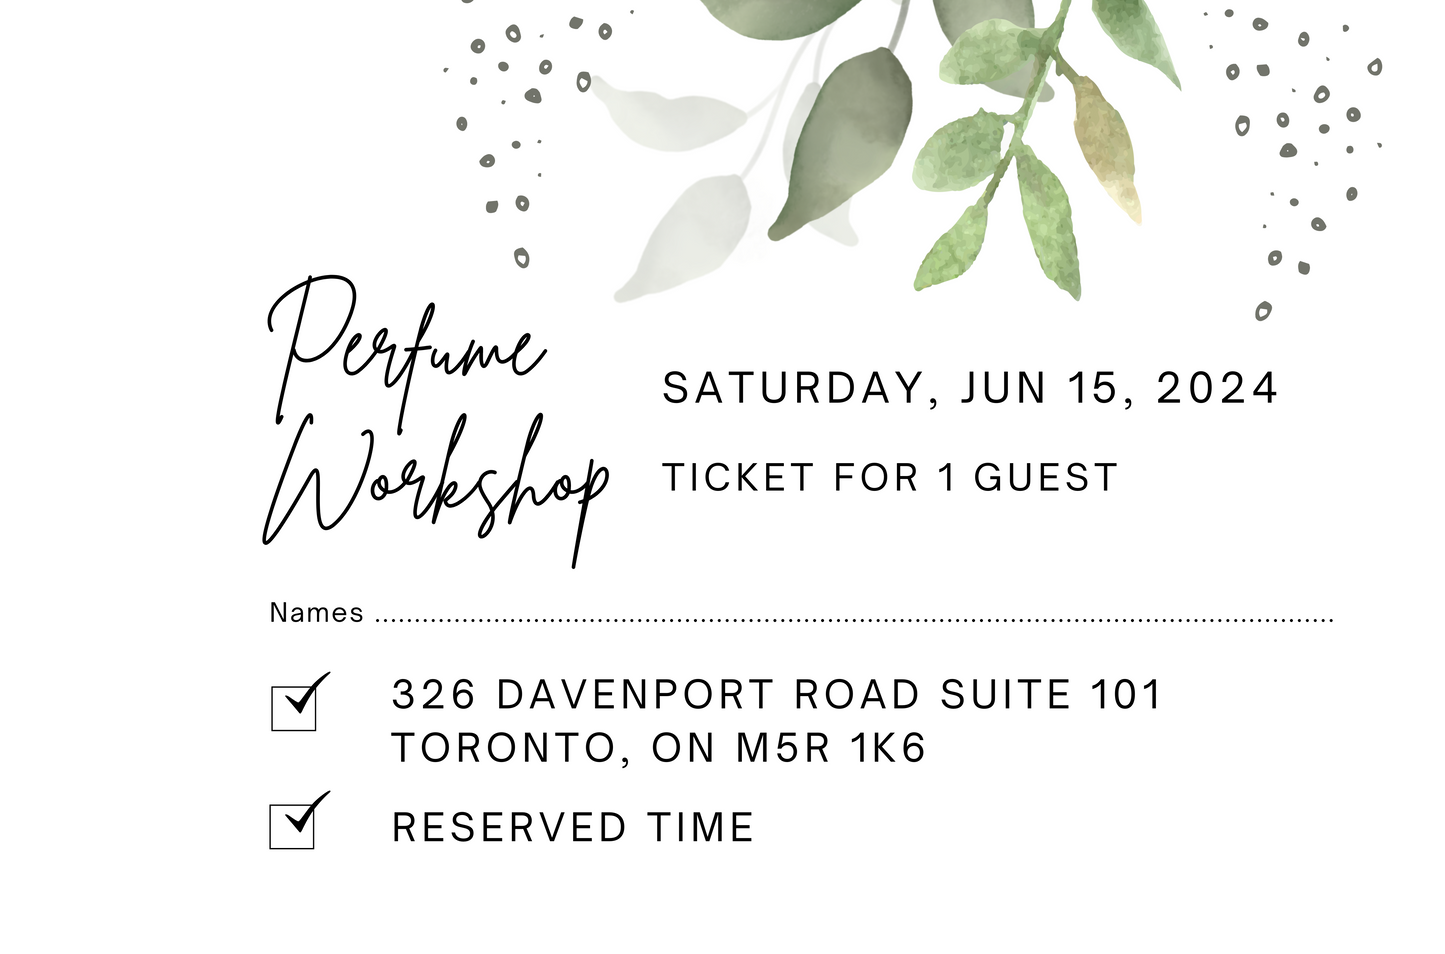 June 15th, 2024 Perfume/Cologne Workshop Session For 1 Guest